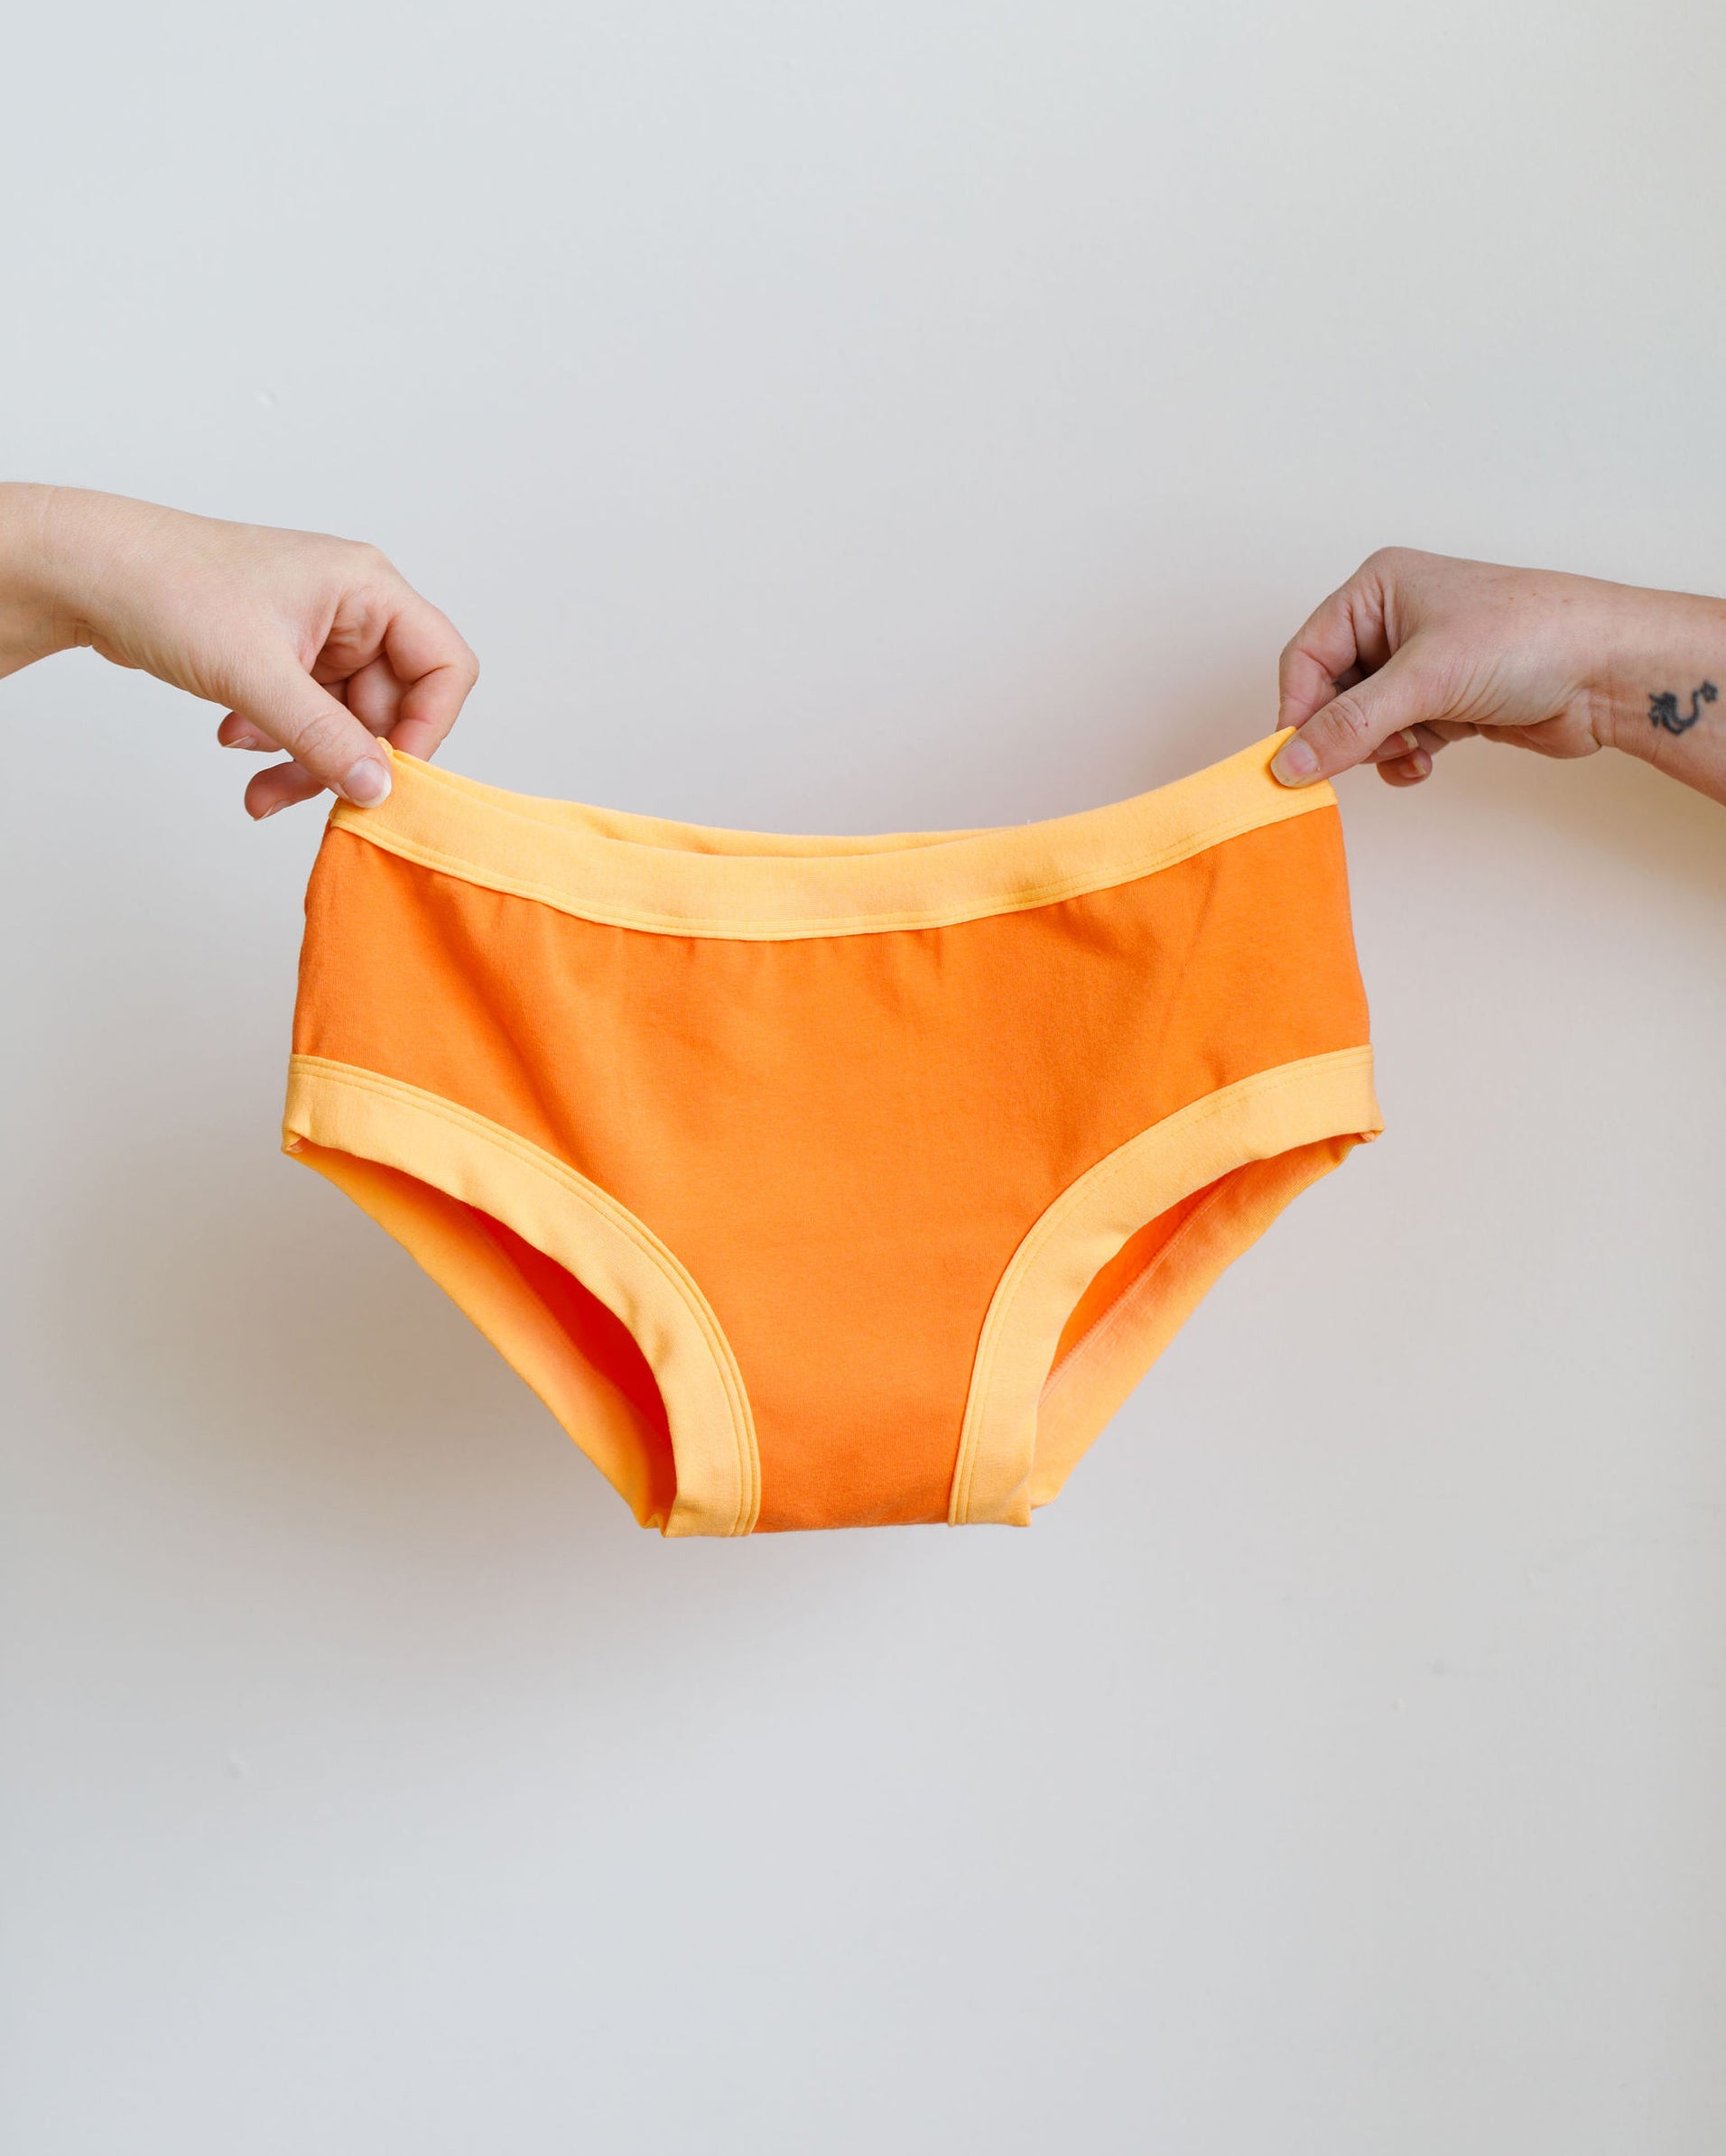 Two hands holding Thunderpants Hipster style underwear in Creamsicle: dark orange with light orange binding.